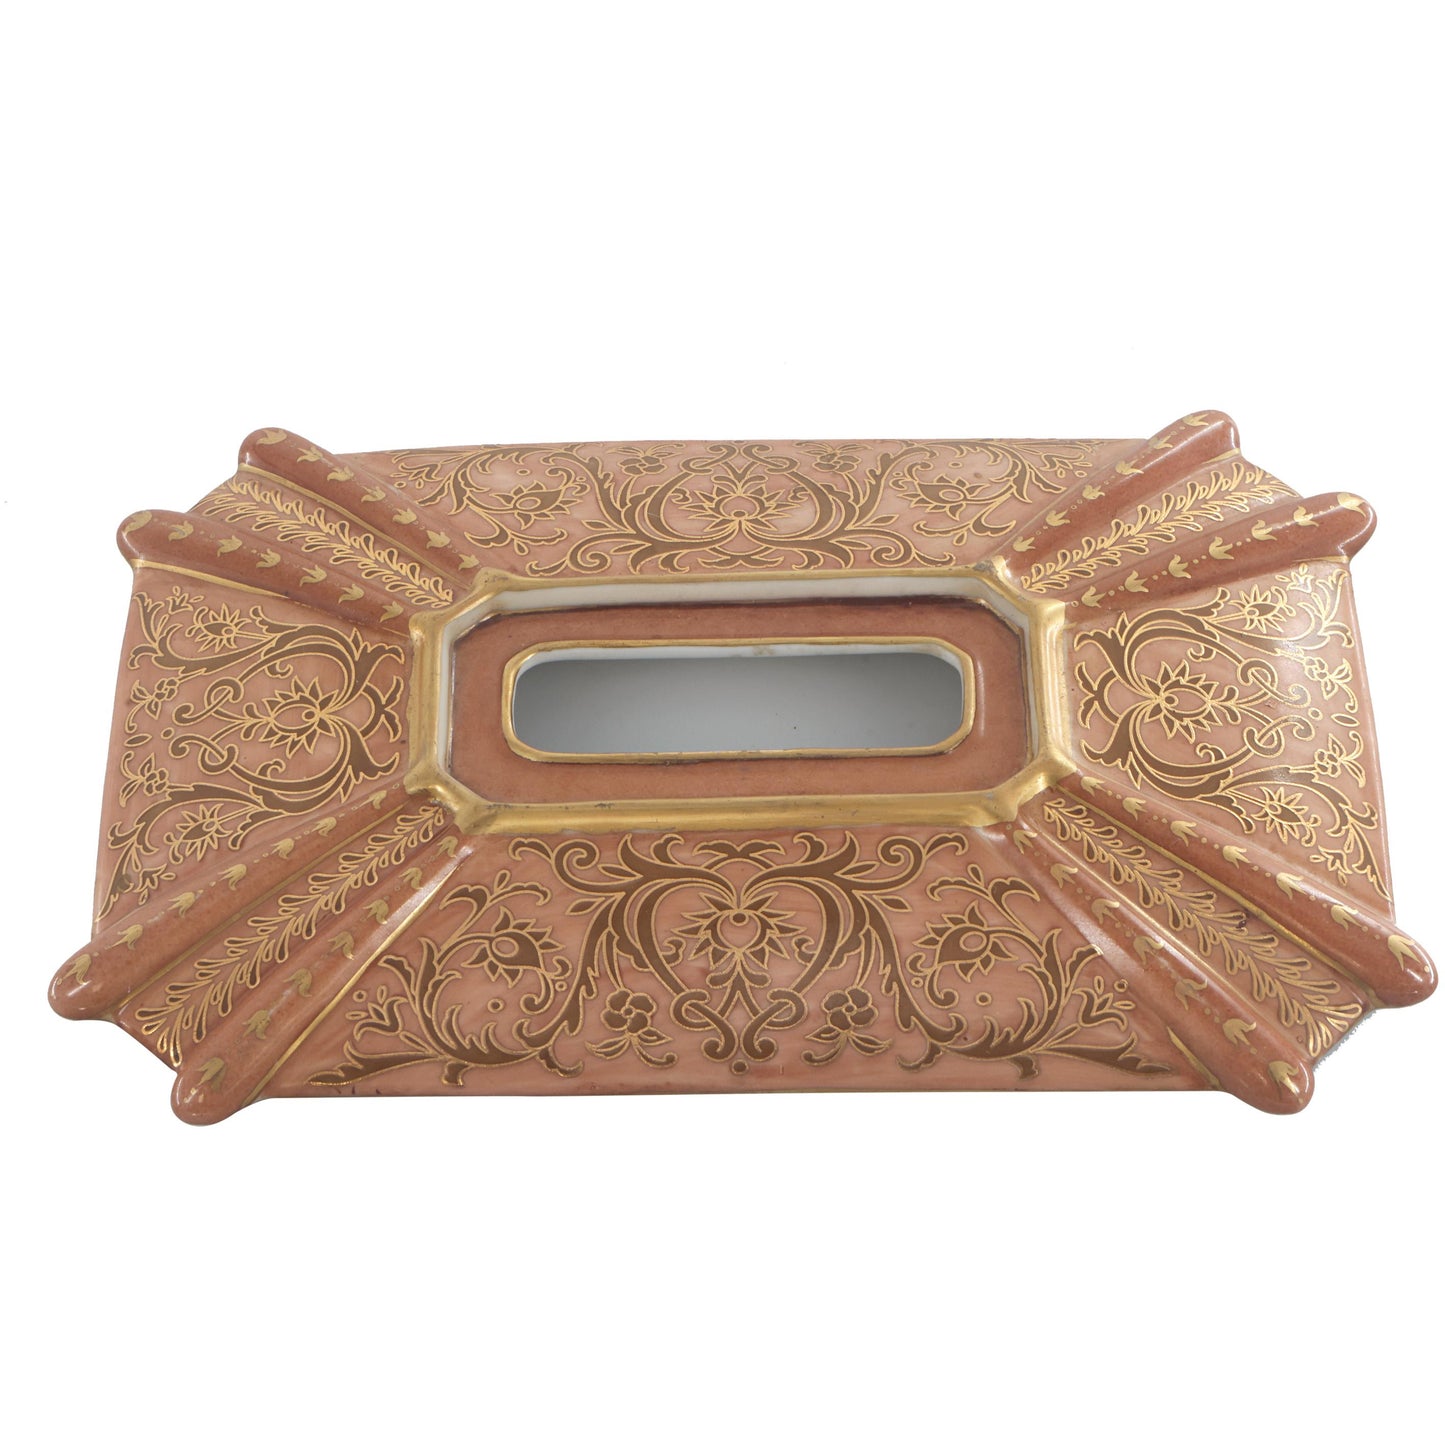 Hand-painted Baroque Style Porcelain Tissue Holder